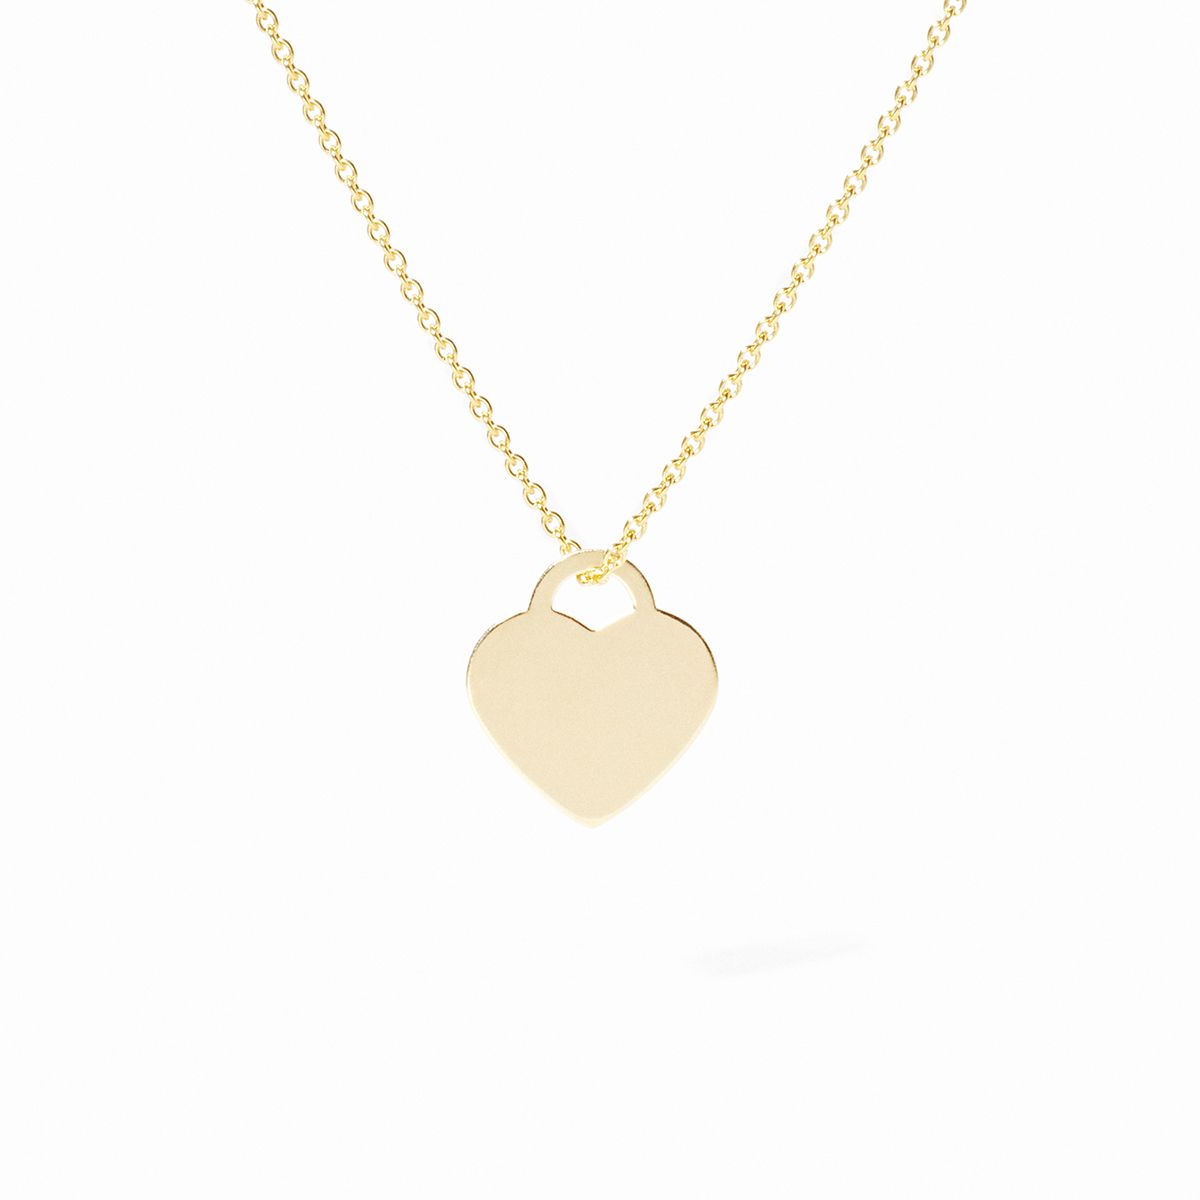 Luxury necklaces and pendants, white gold, rose gold, yellow gold 